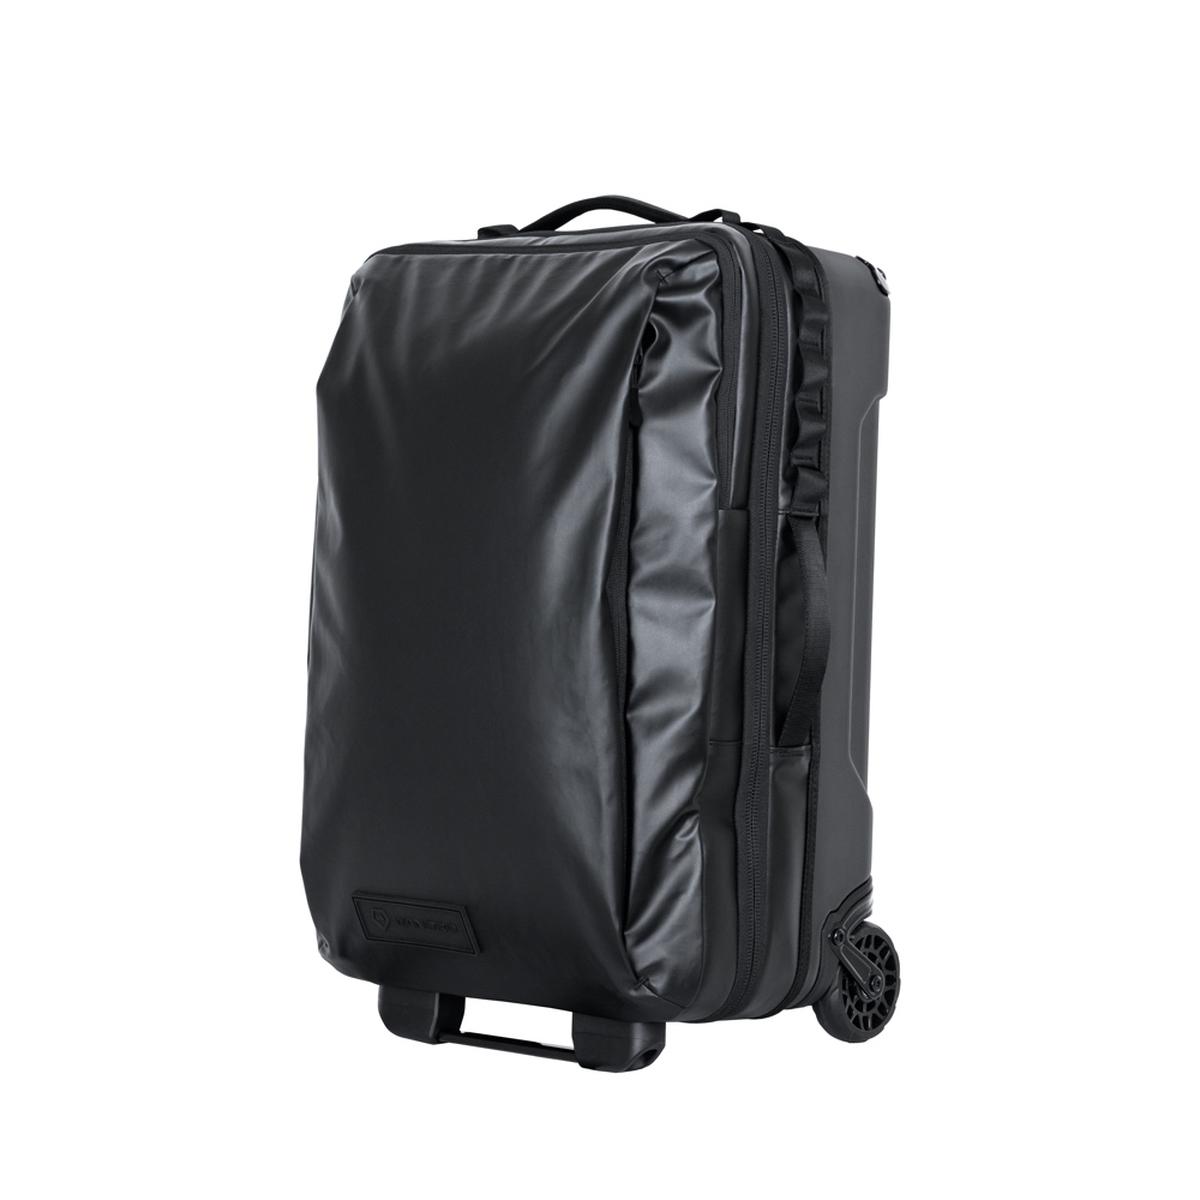 WANDRD Transit Carry-On Roller